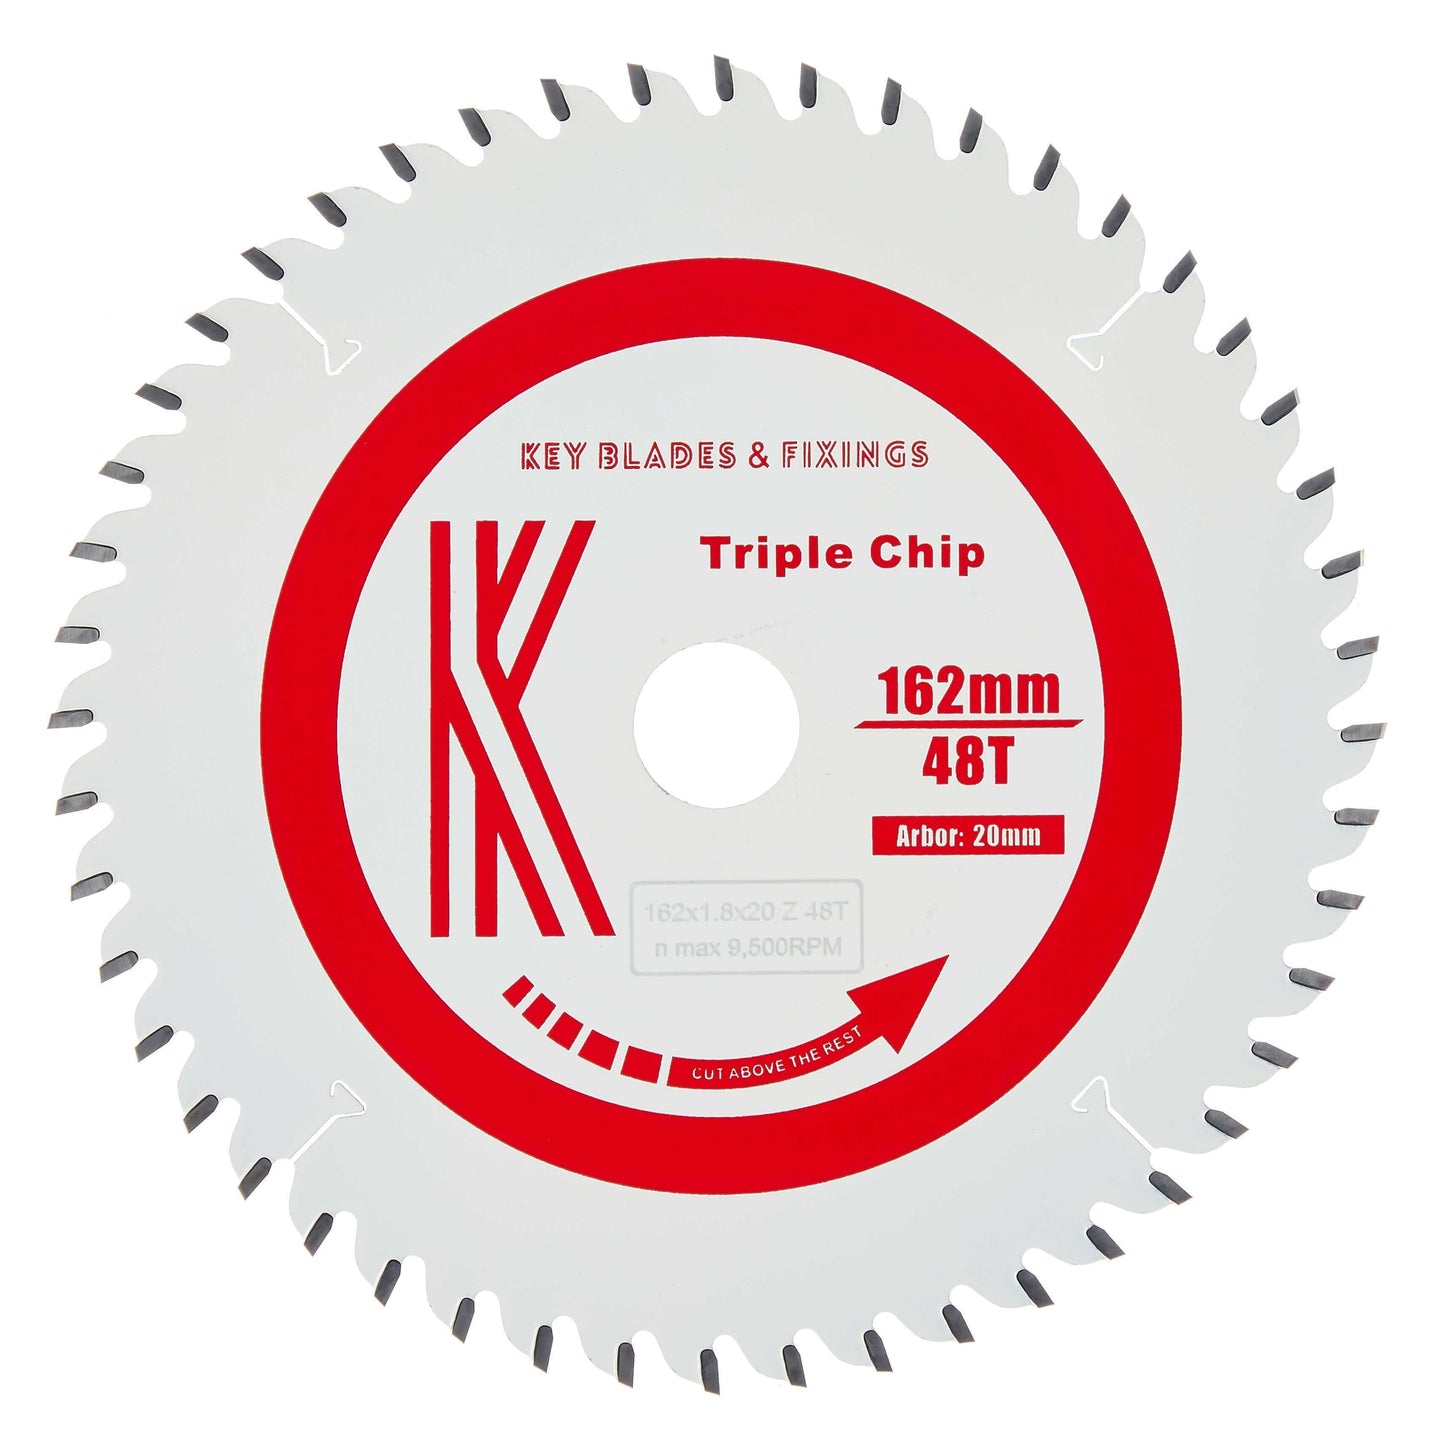 162mm x 20mm x 1.8mm 48 Tooth TCG Track Saw (Solid Surface) - 3205